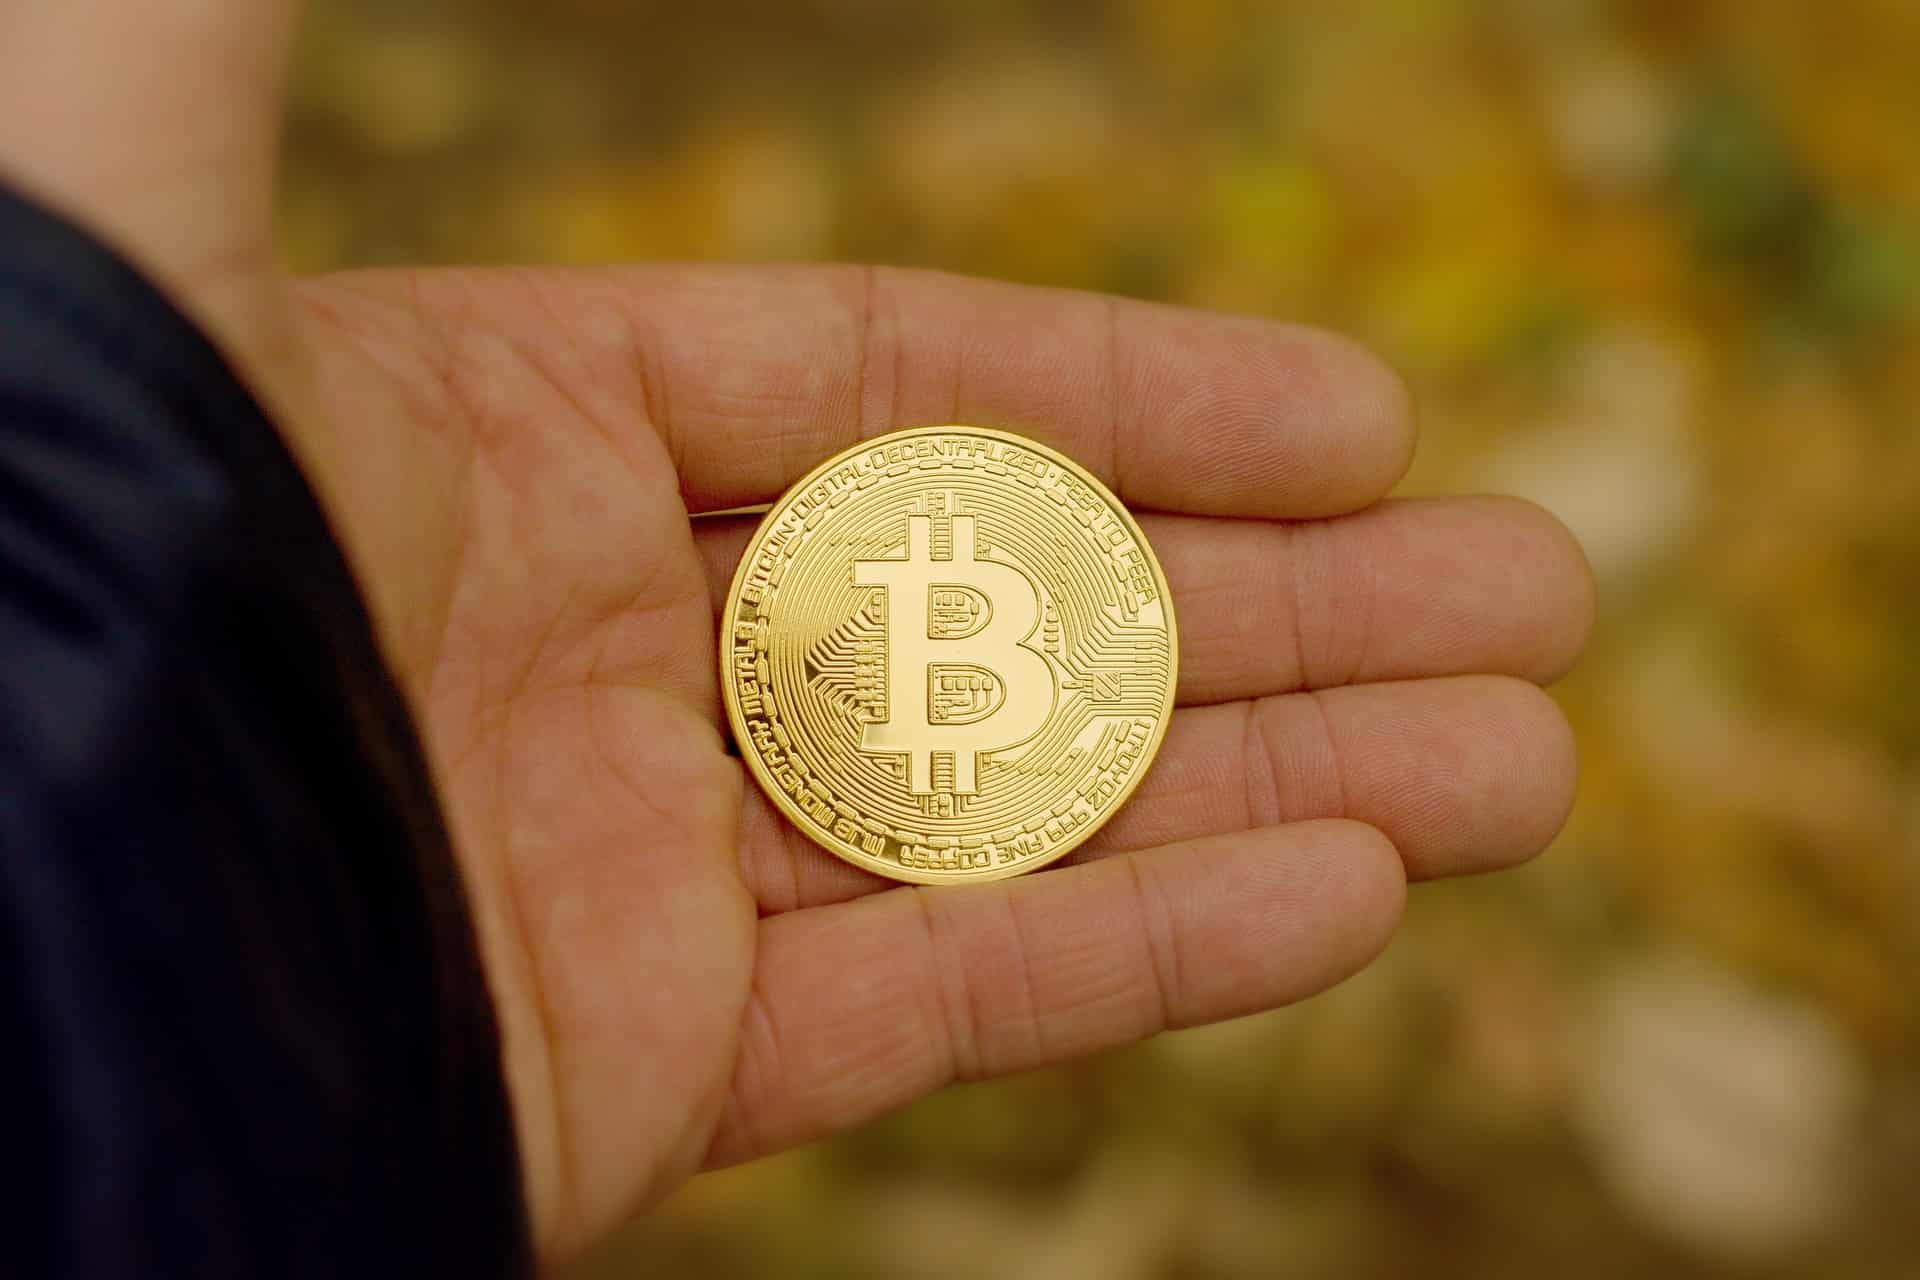 Physical bitcoin in someone's hand